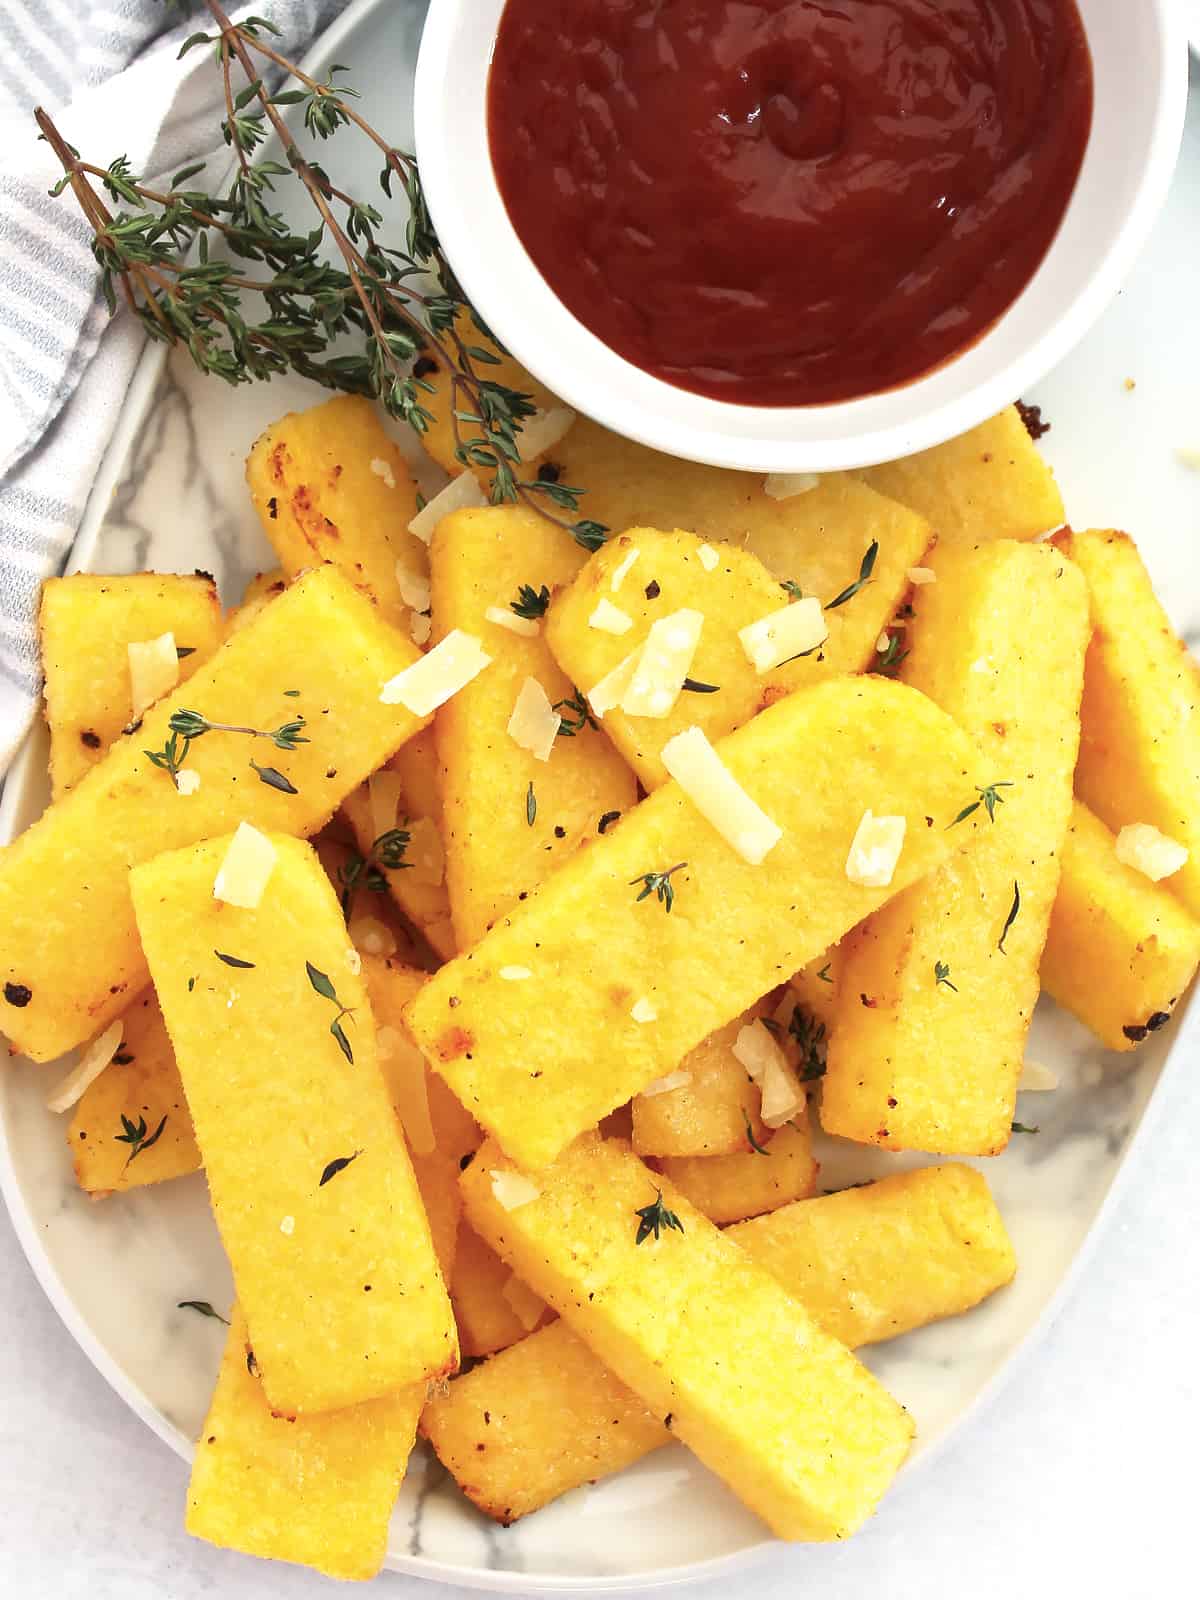 Polenta fries served on a plate with a bowl of tomato ketchup.